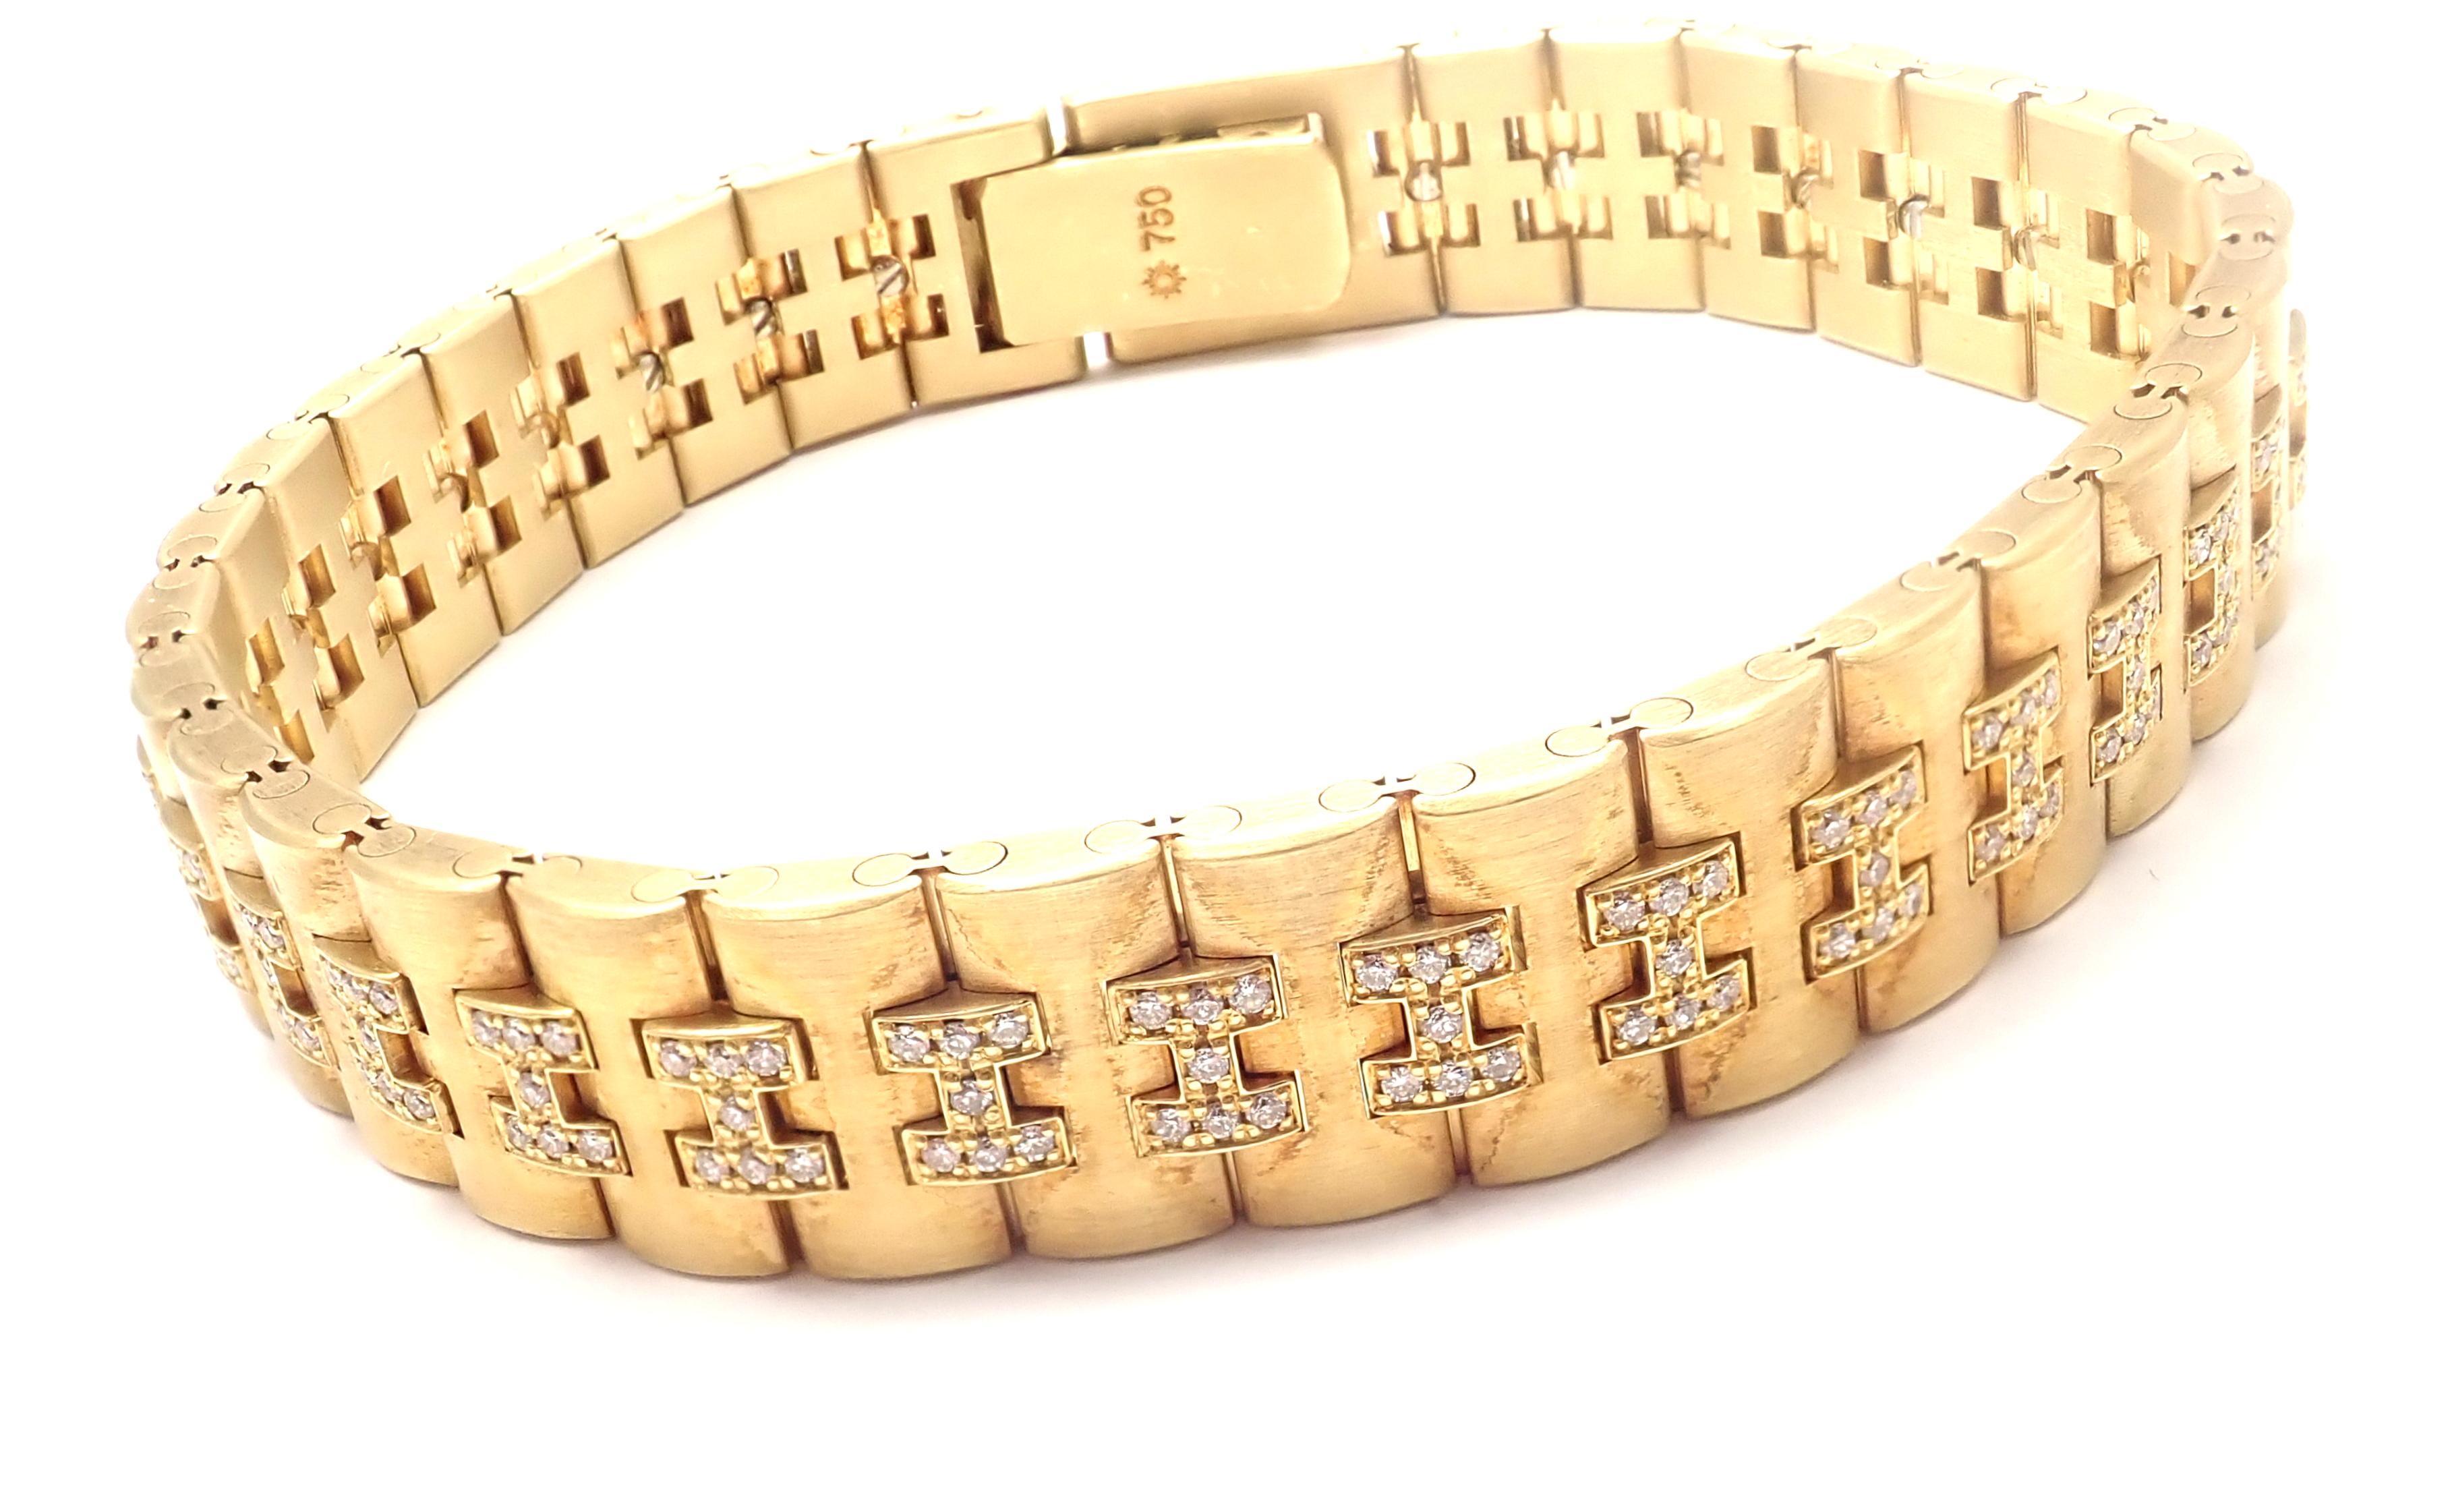 18k Yellow Gold Diamond H Link Bracelet by Hermes.
With 203 round brilliant cut diamonds VVS1 clarity F color total weight approximately 1ct
Details:
Length: 7.5